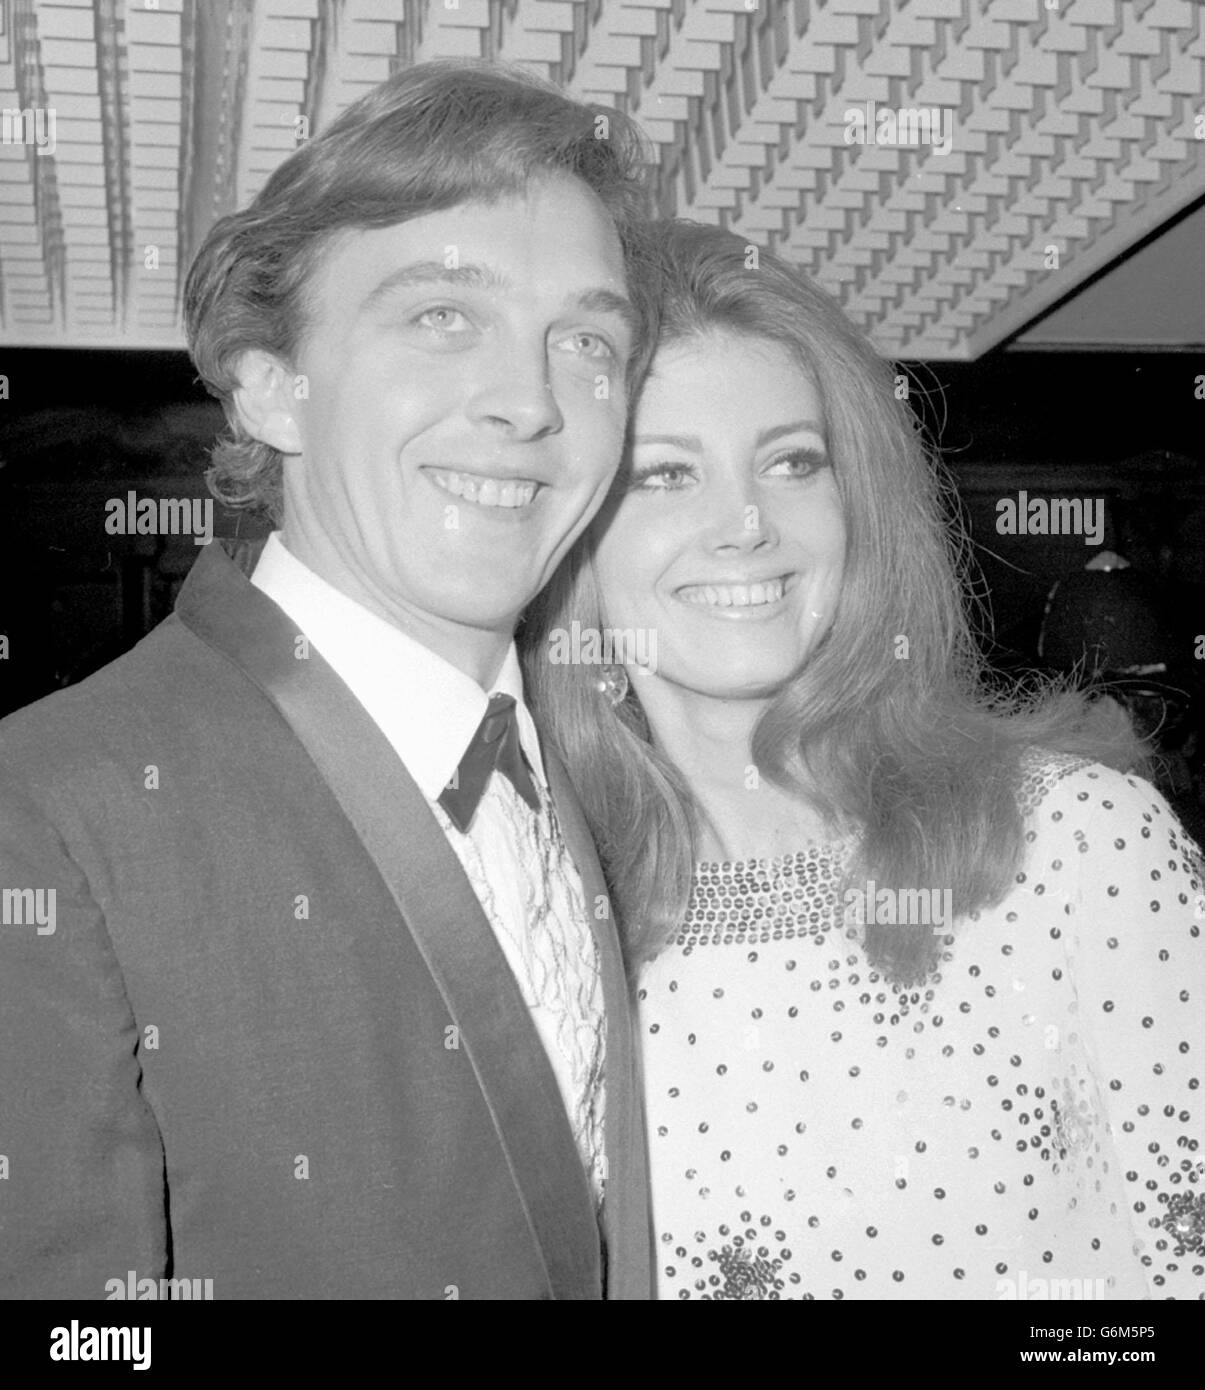 https://c8.alamy.com/comp/G6M5P5/david-hemmings-and-his-american-wife-gayle-arriving-at-the-premiere-G6M5P5.jpg